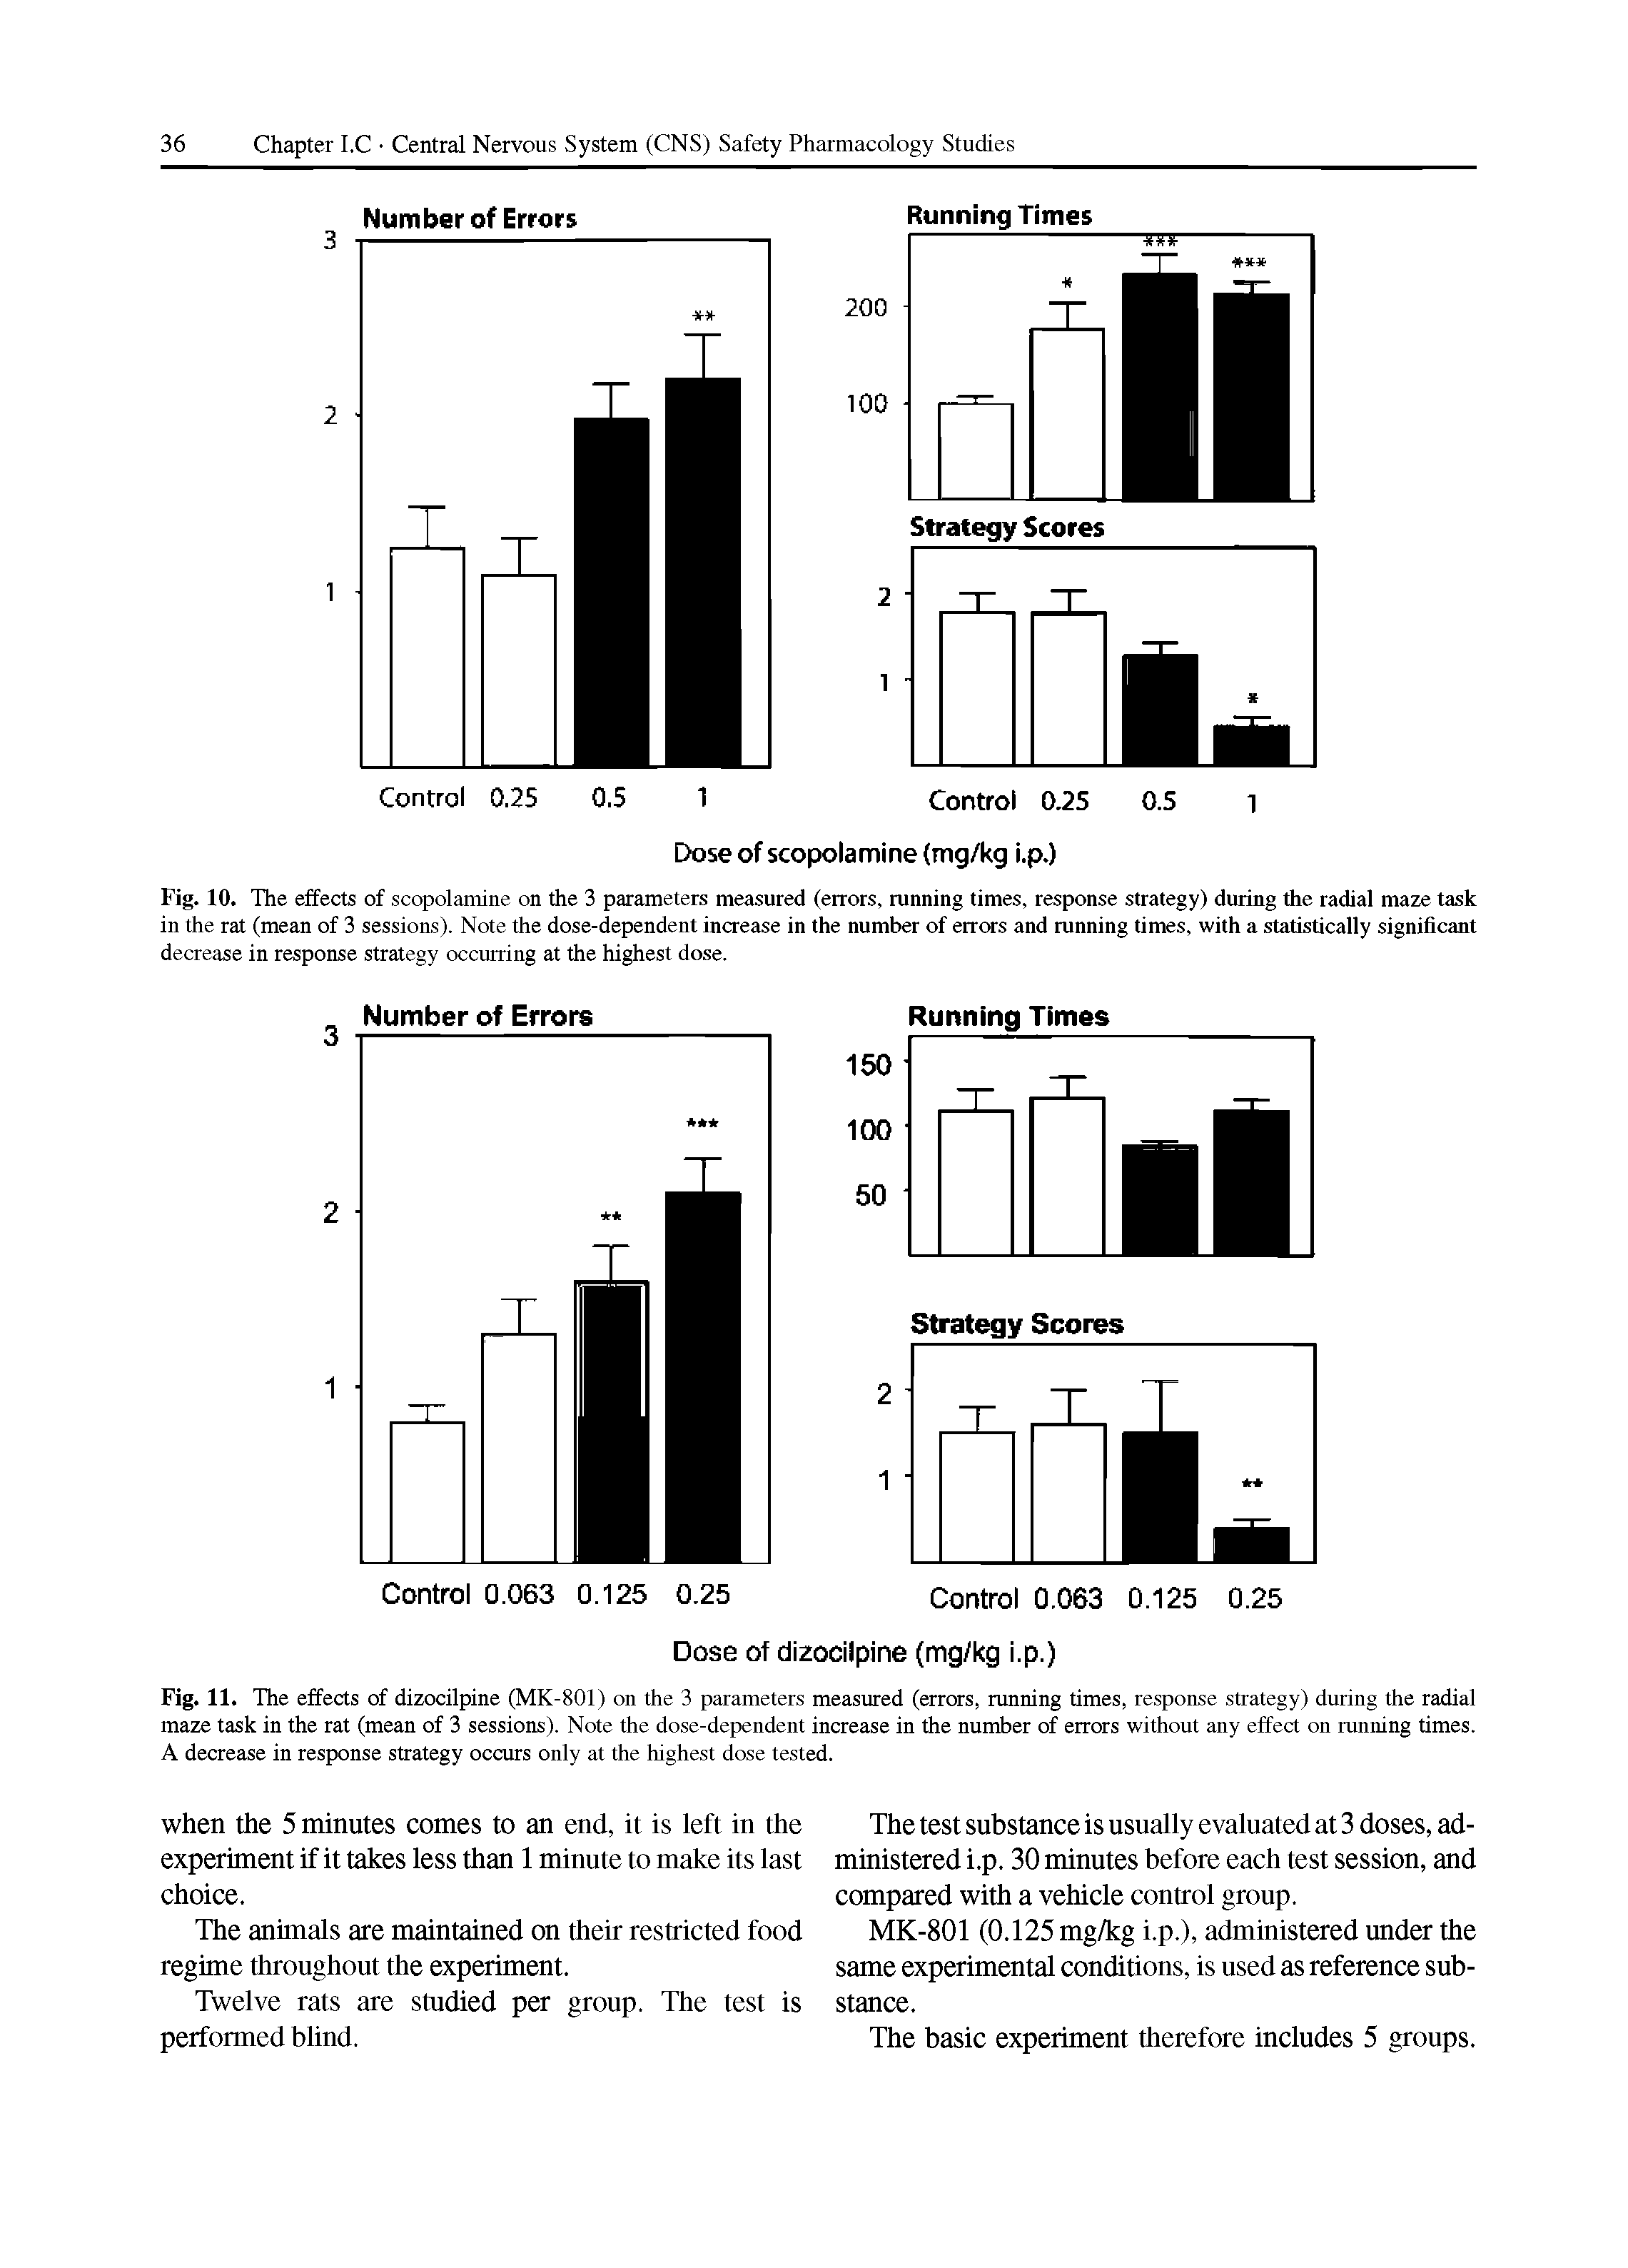 Fig. 10. The effects of scopolamine on the 3 parameters measured (errors, running times, response strategy) during the radial maze task in the rat (mean of 3 sessions). Note the dose-dependent increase in the number of errors and running times, with a statistically significant decrease in response strategy occurring at the highest dose.